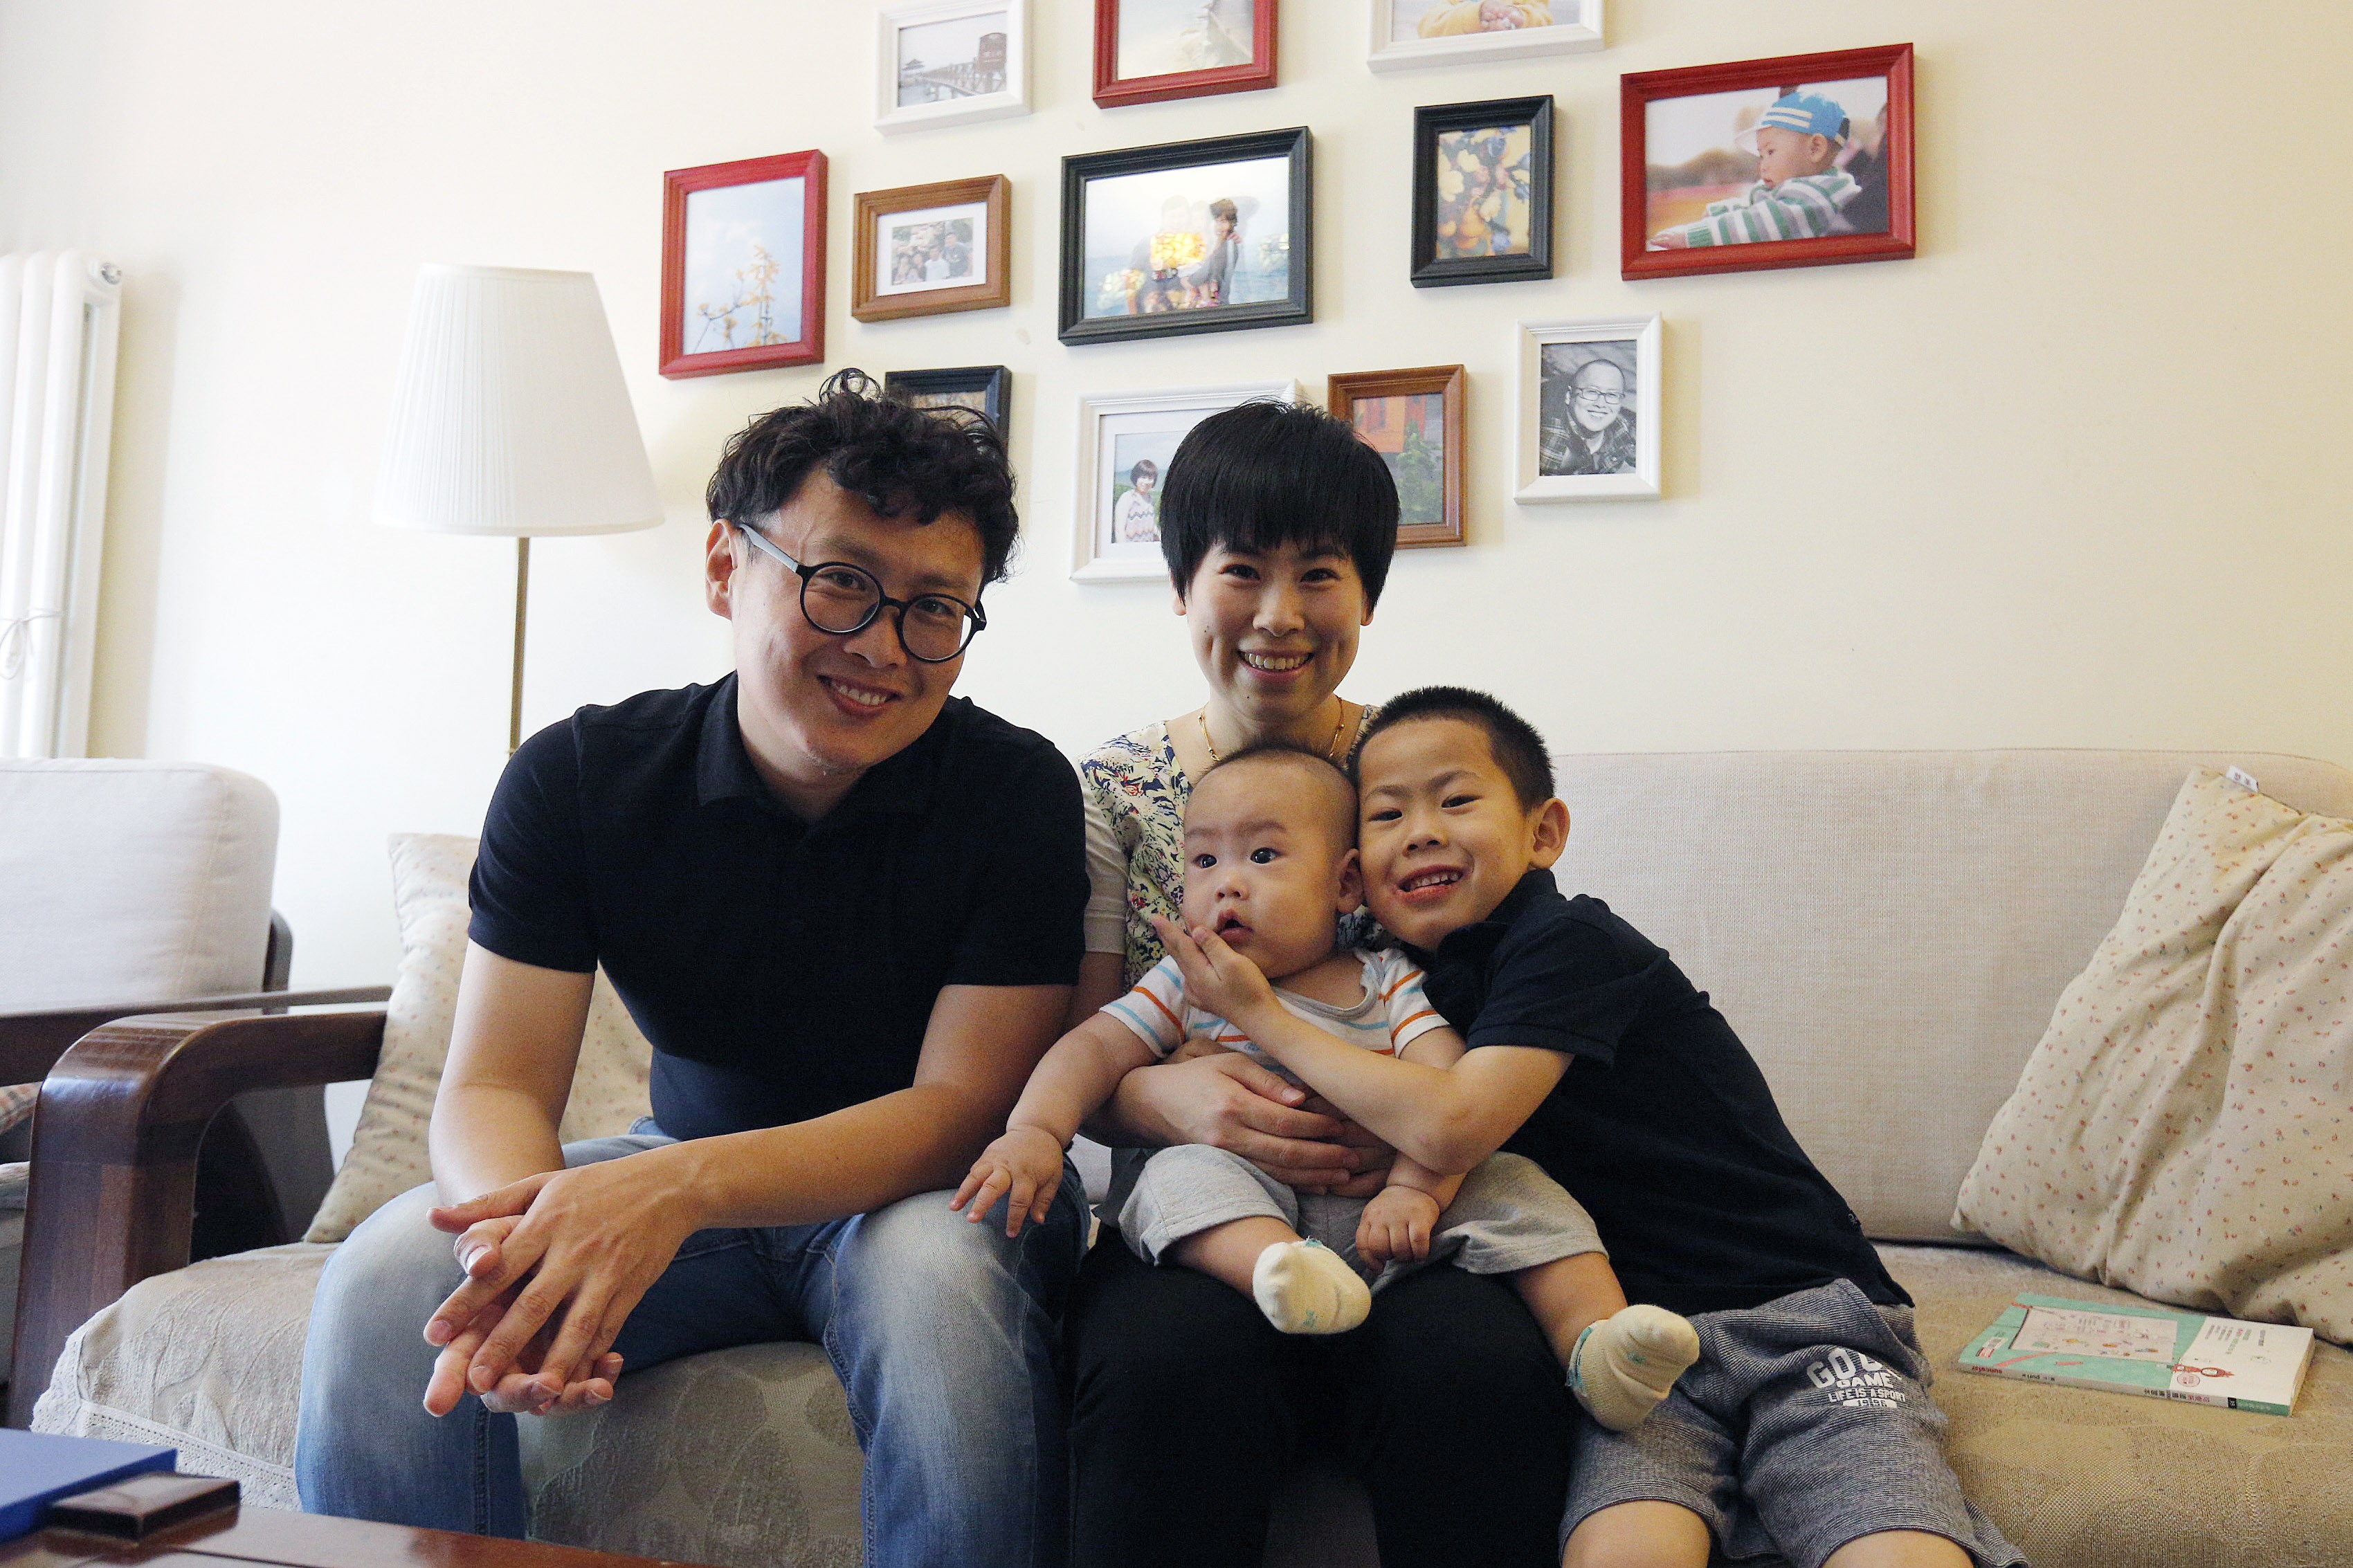 A family in Beijing. As Confucius taught, “the strength of a nation derives from the integrity of the home”. Hong Kong and mainland China should stand strong in resisting the advance of cohabitation. Photo: Xinhua